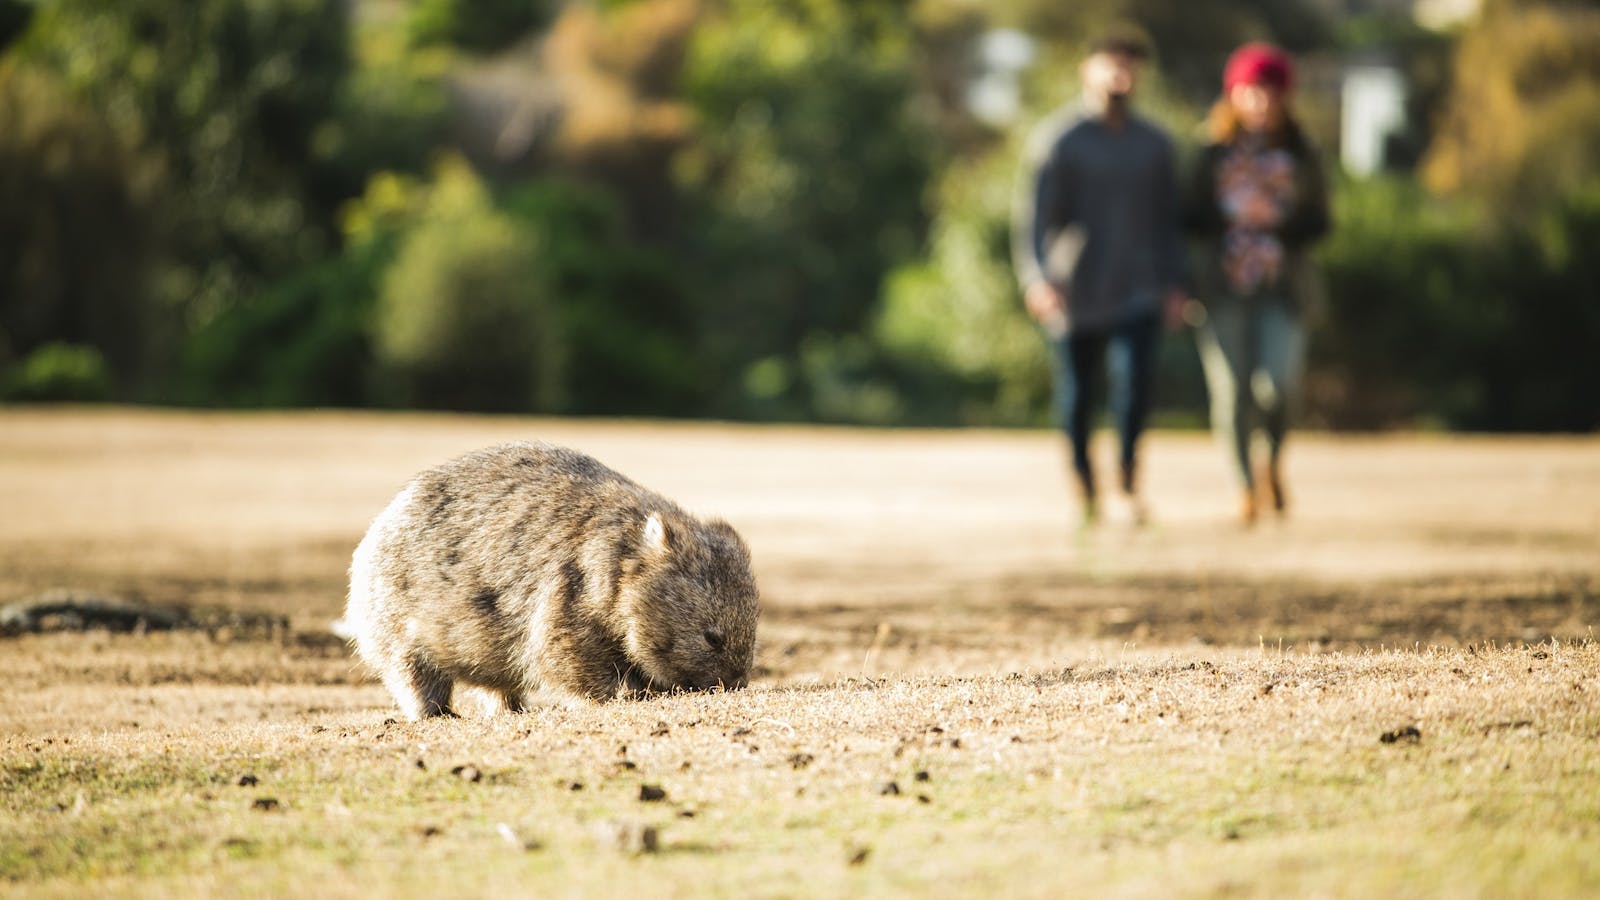 Wombat on Maria Island - A visit ashore included